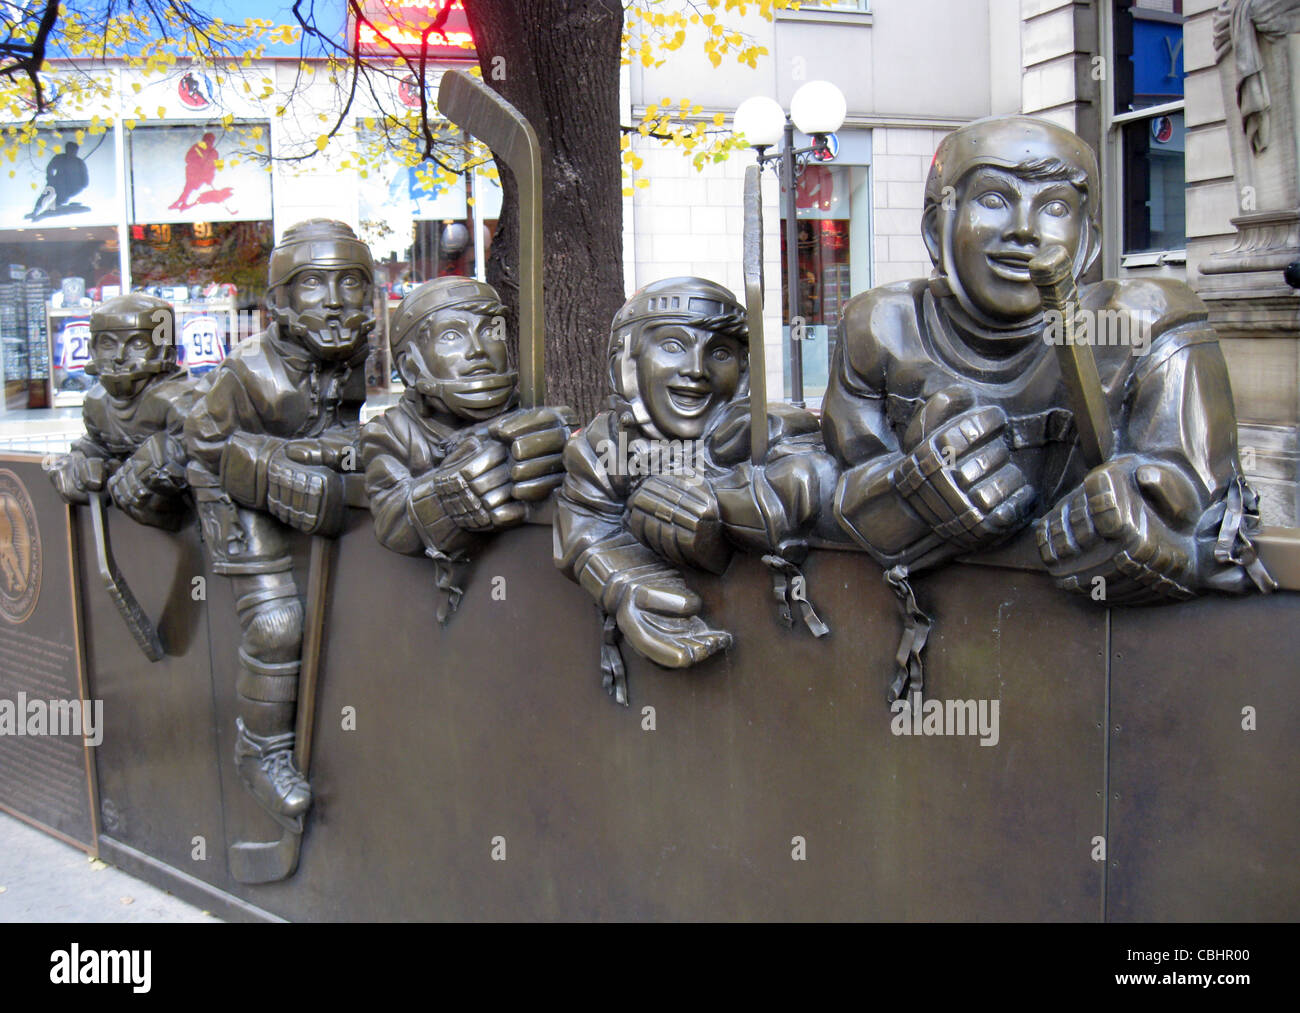 HOCKEY HALL OF FAME, Toronto. Sculpture of players outside the museum. Photo Tony Gale Stock Photo